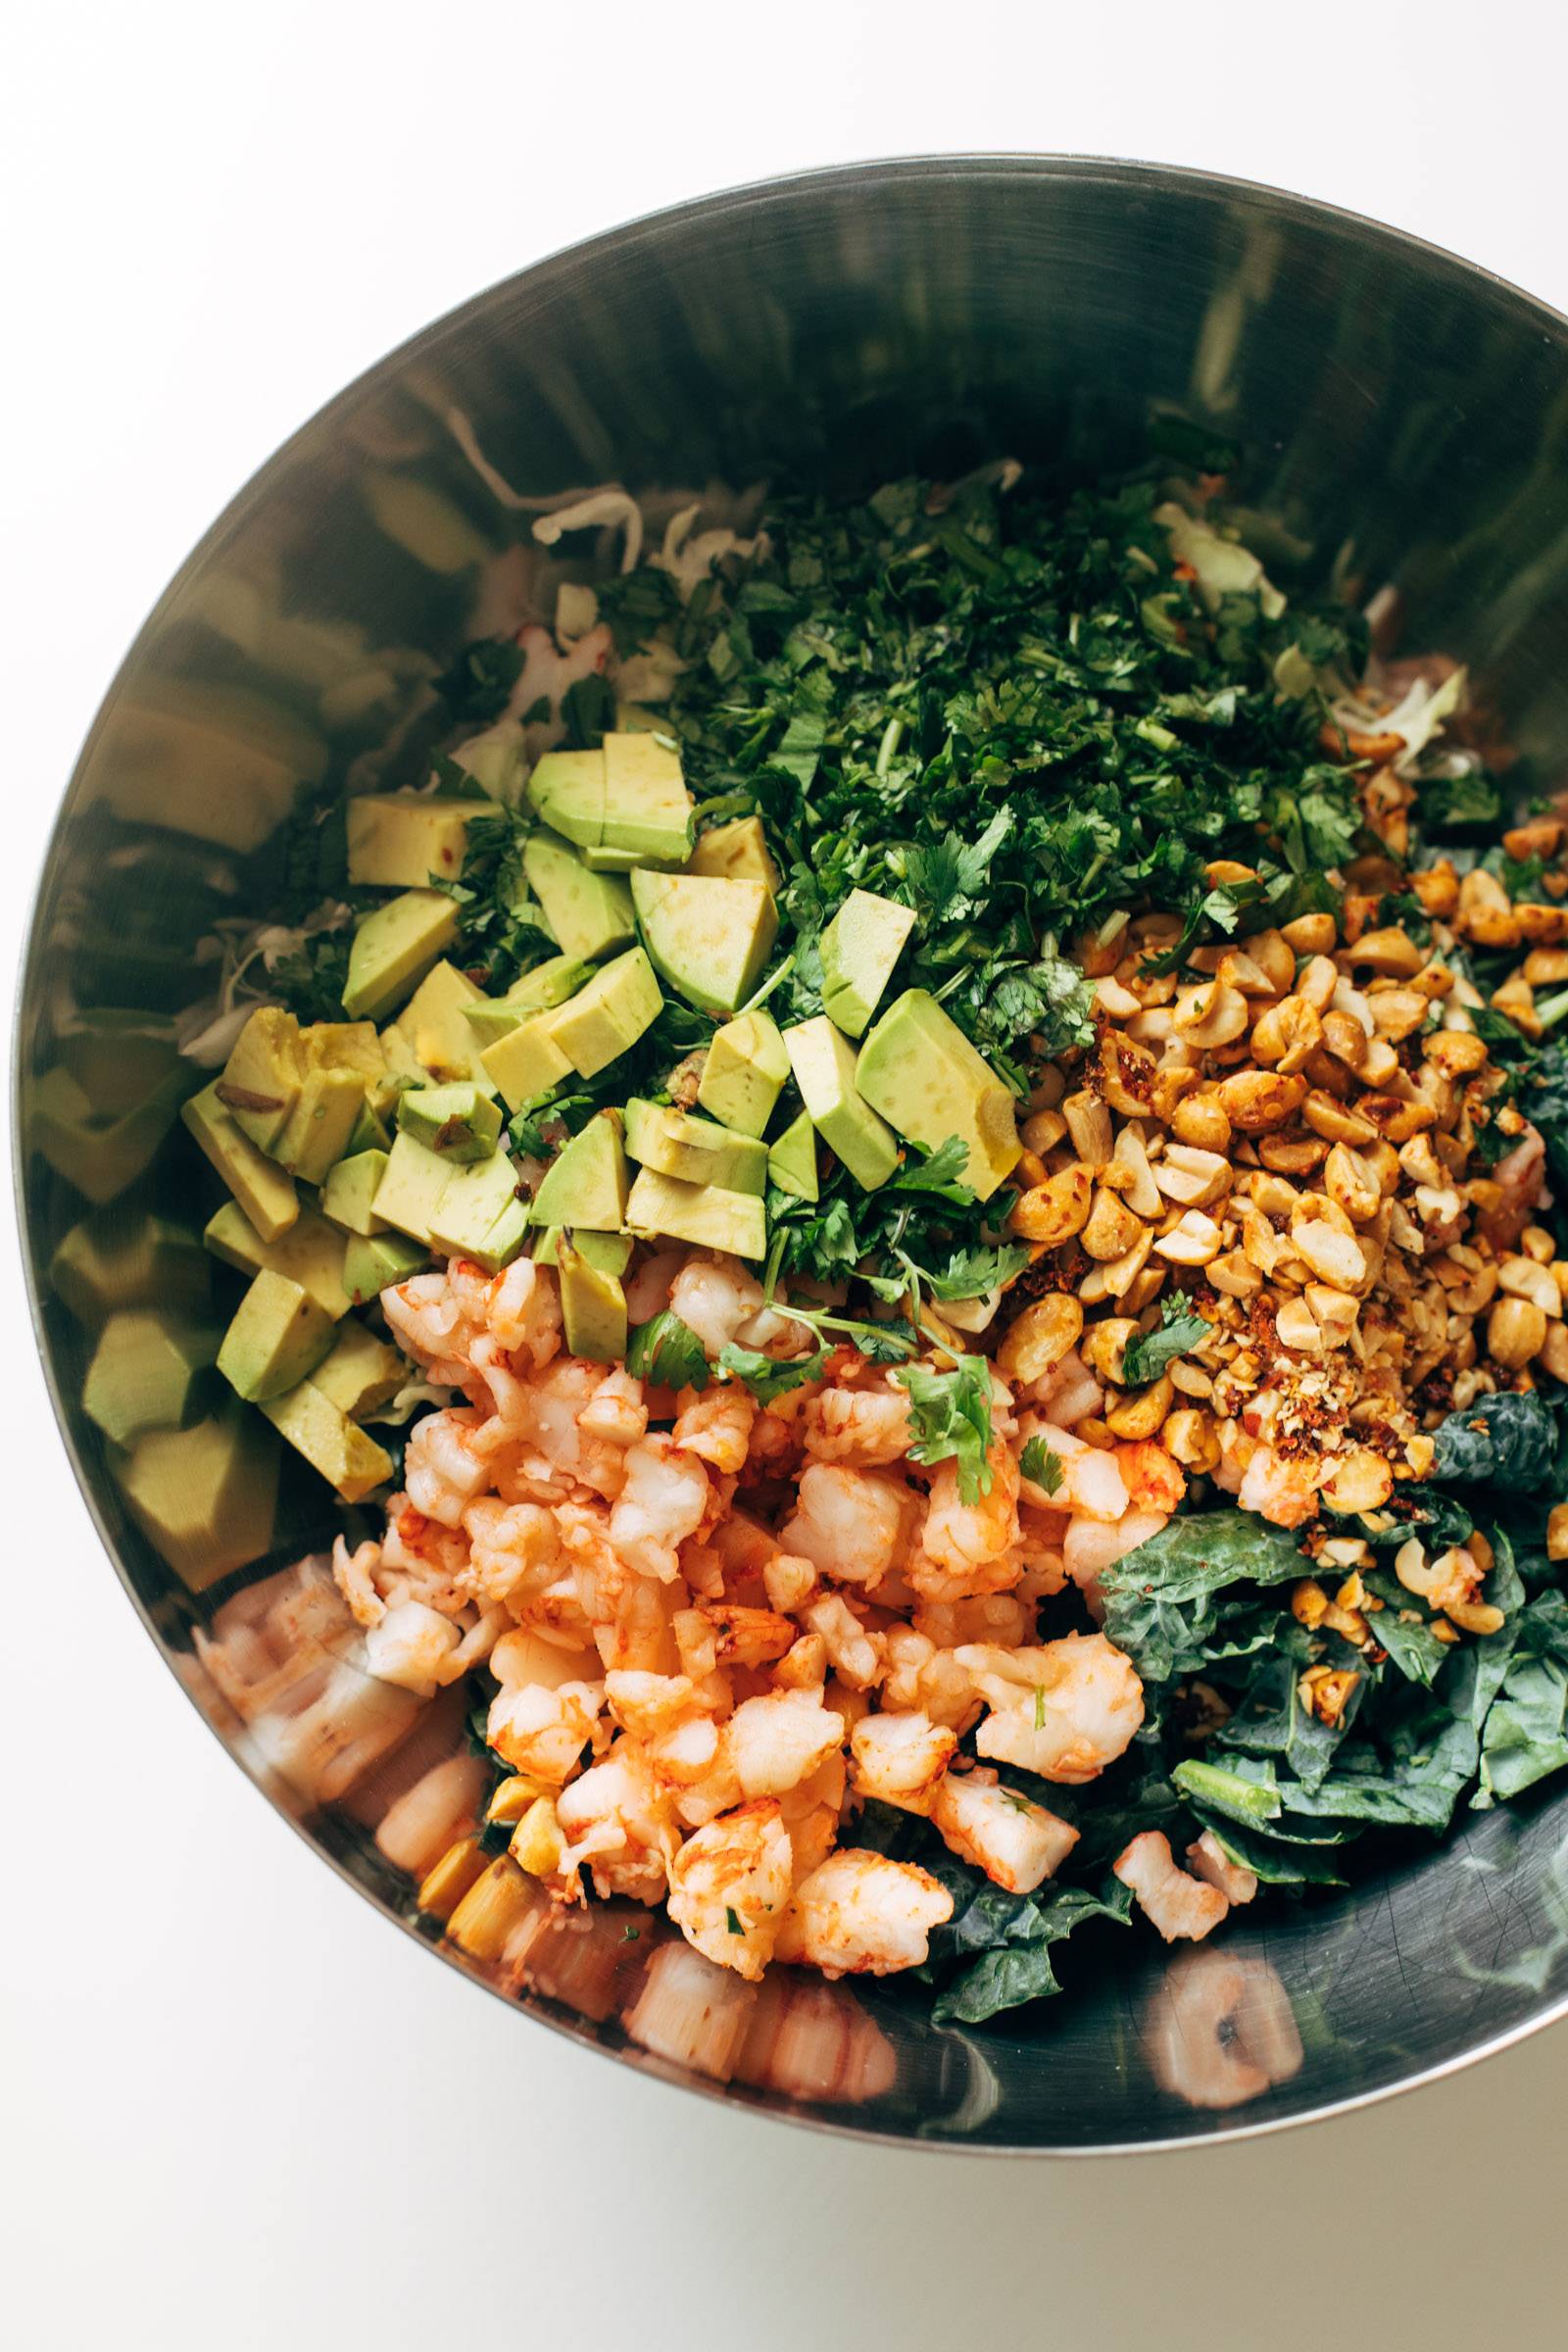 Ingredients for miso crunch salad in a bowl